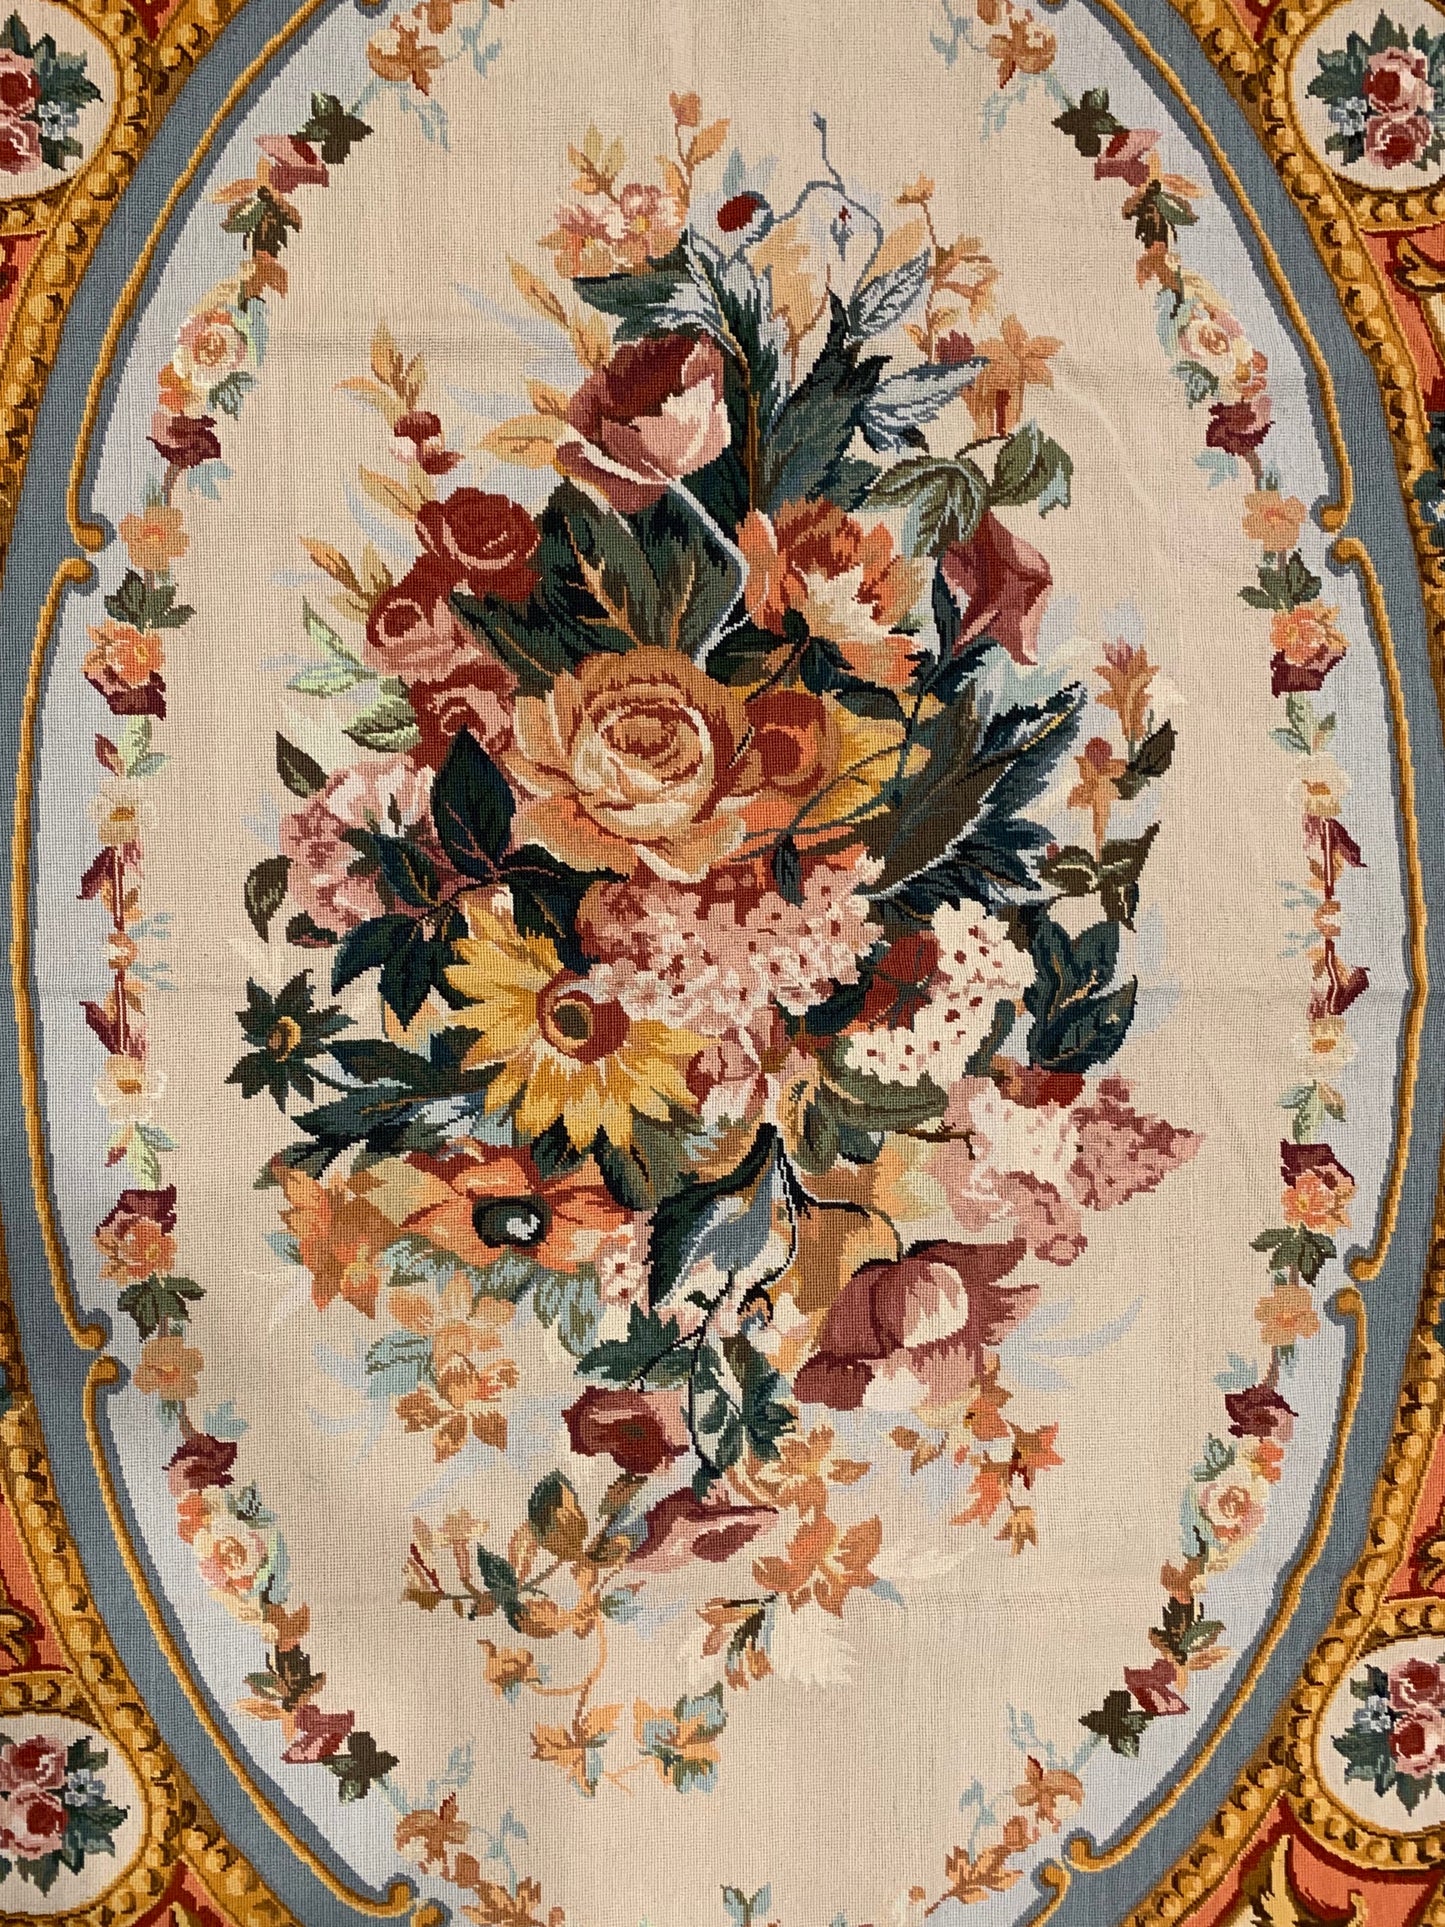 Chinese Floral Needlepoint